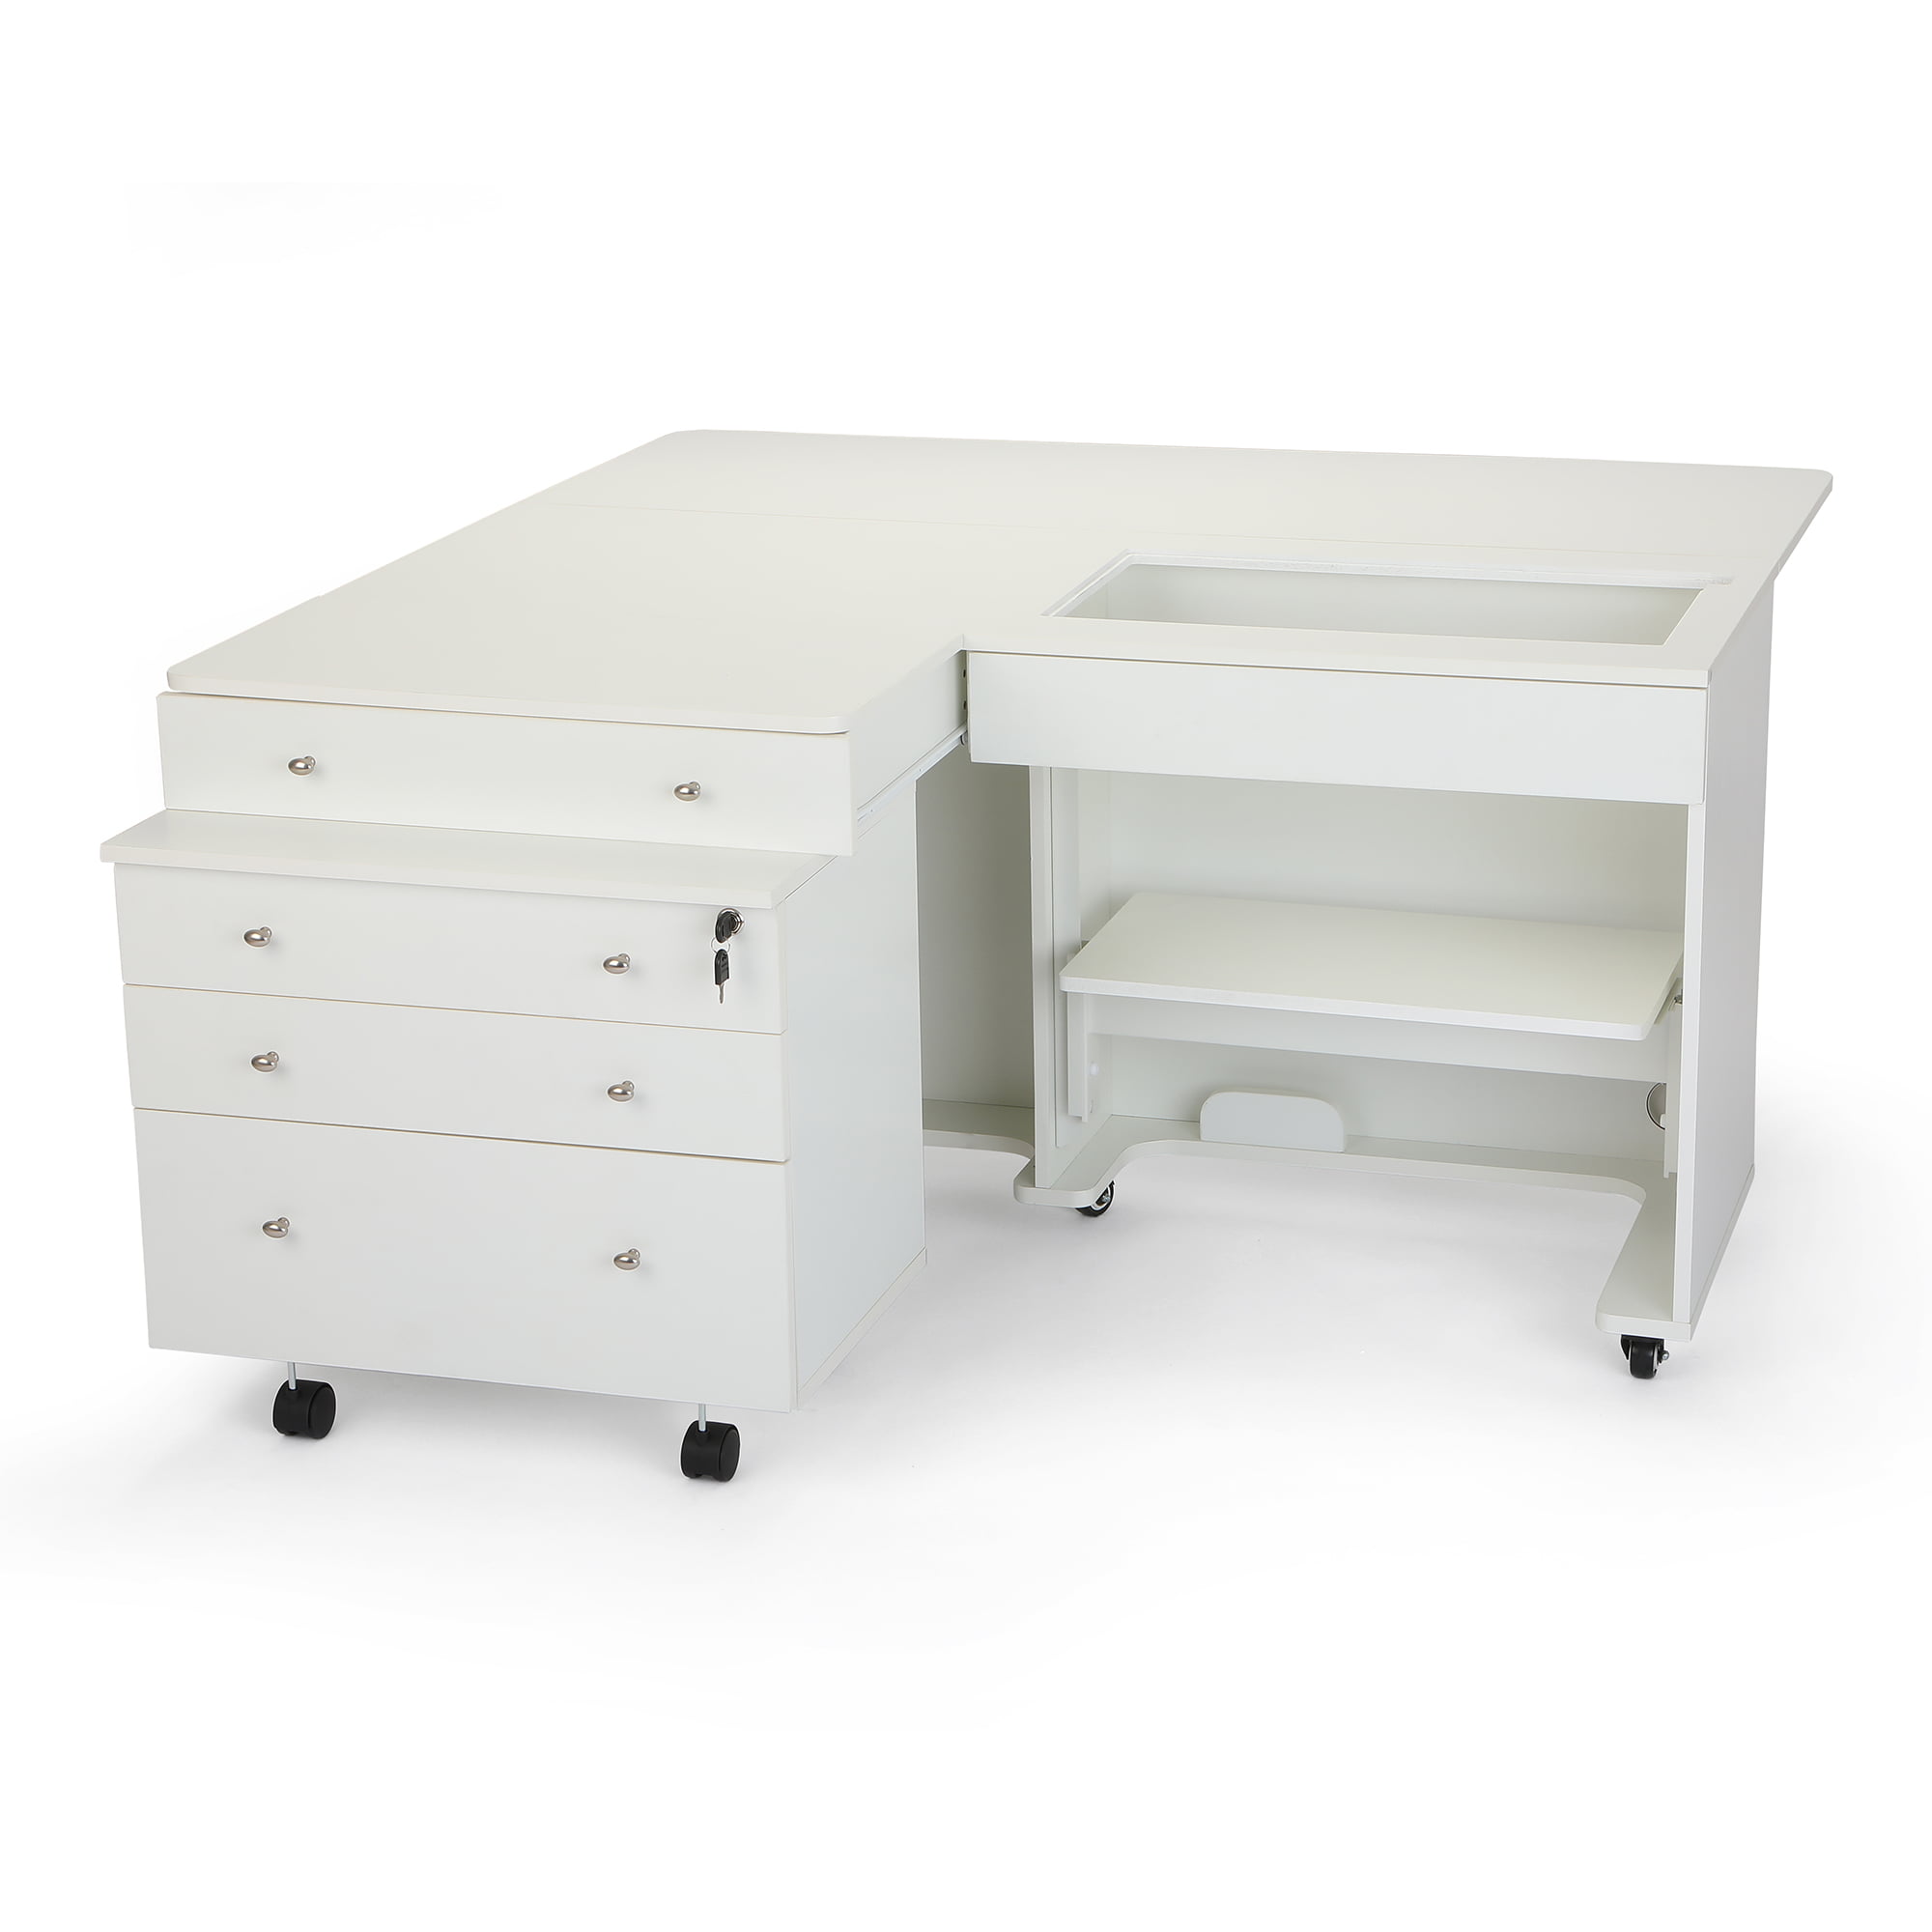 Kangaroo Ii Sewing Cabinet And Table W Lift And Storage 2